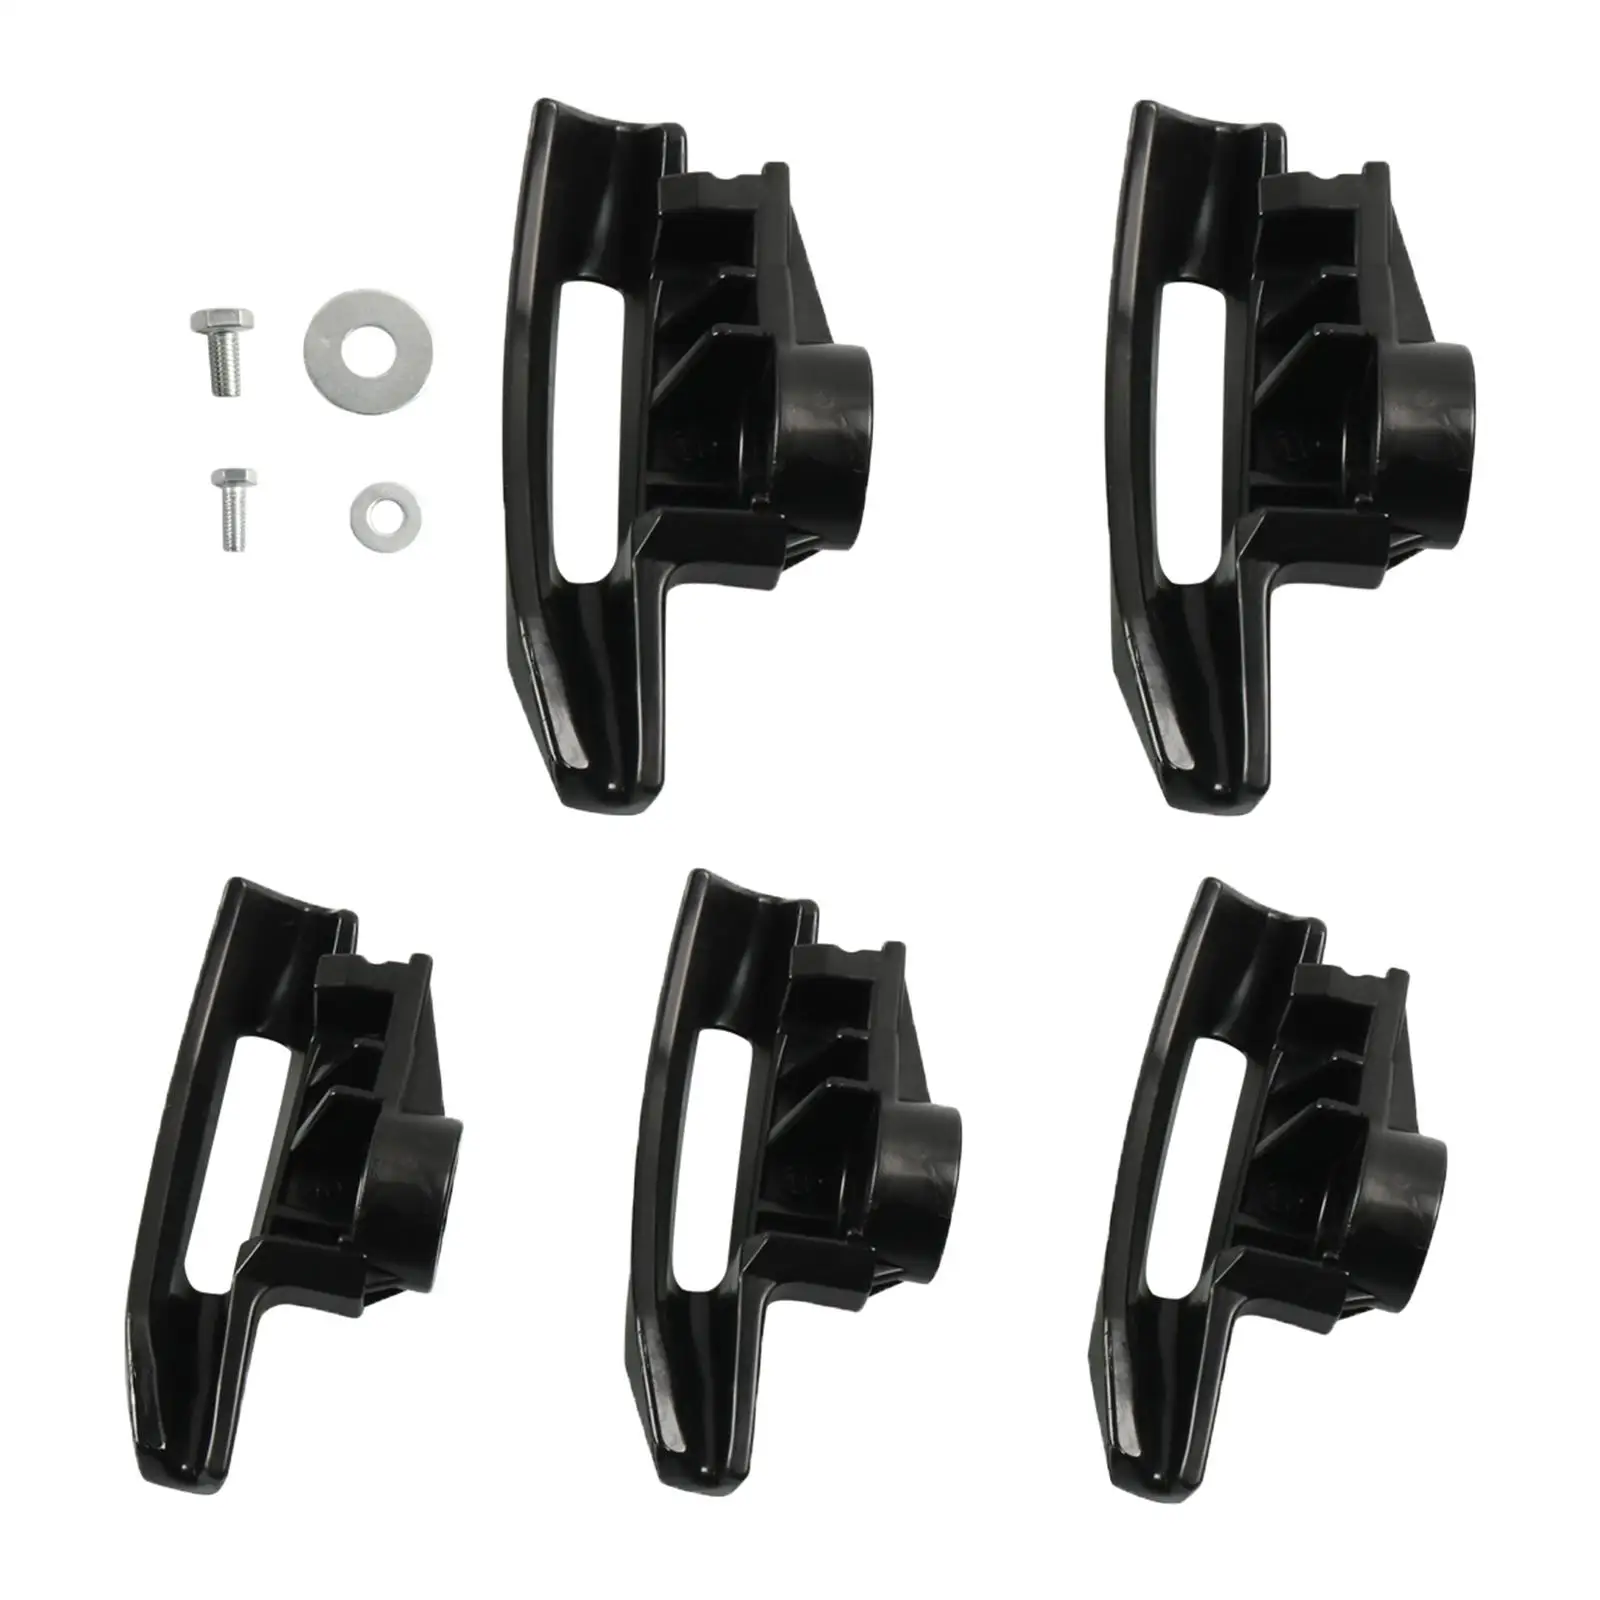 5 Pieces 8183061 Duck Head 8182960 Nylon Mount Demount Heads Tire Change Tool Fit for Coats 7655 7660 7665 7050 7055 7060 7065